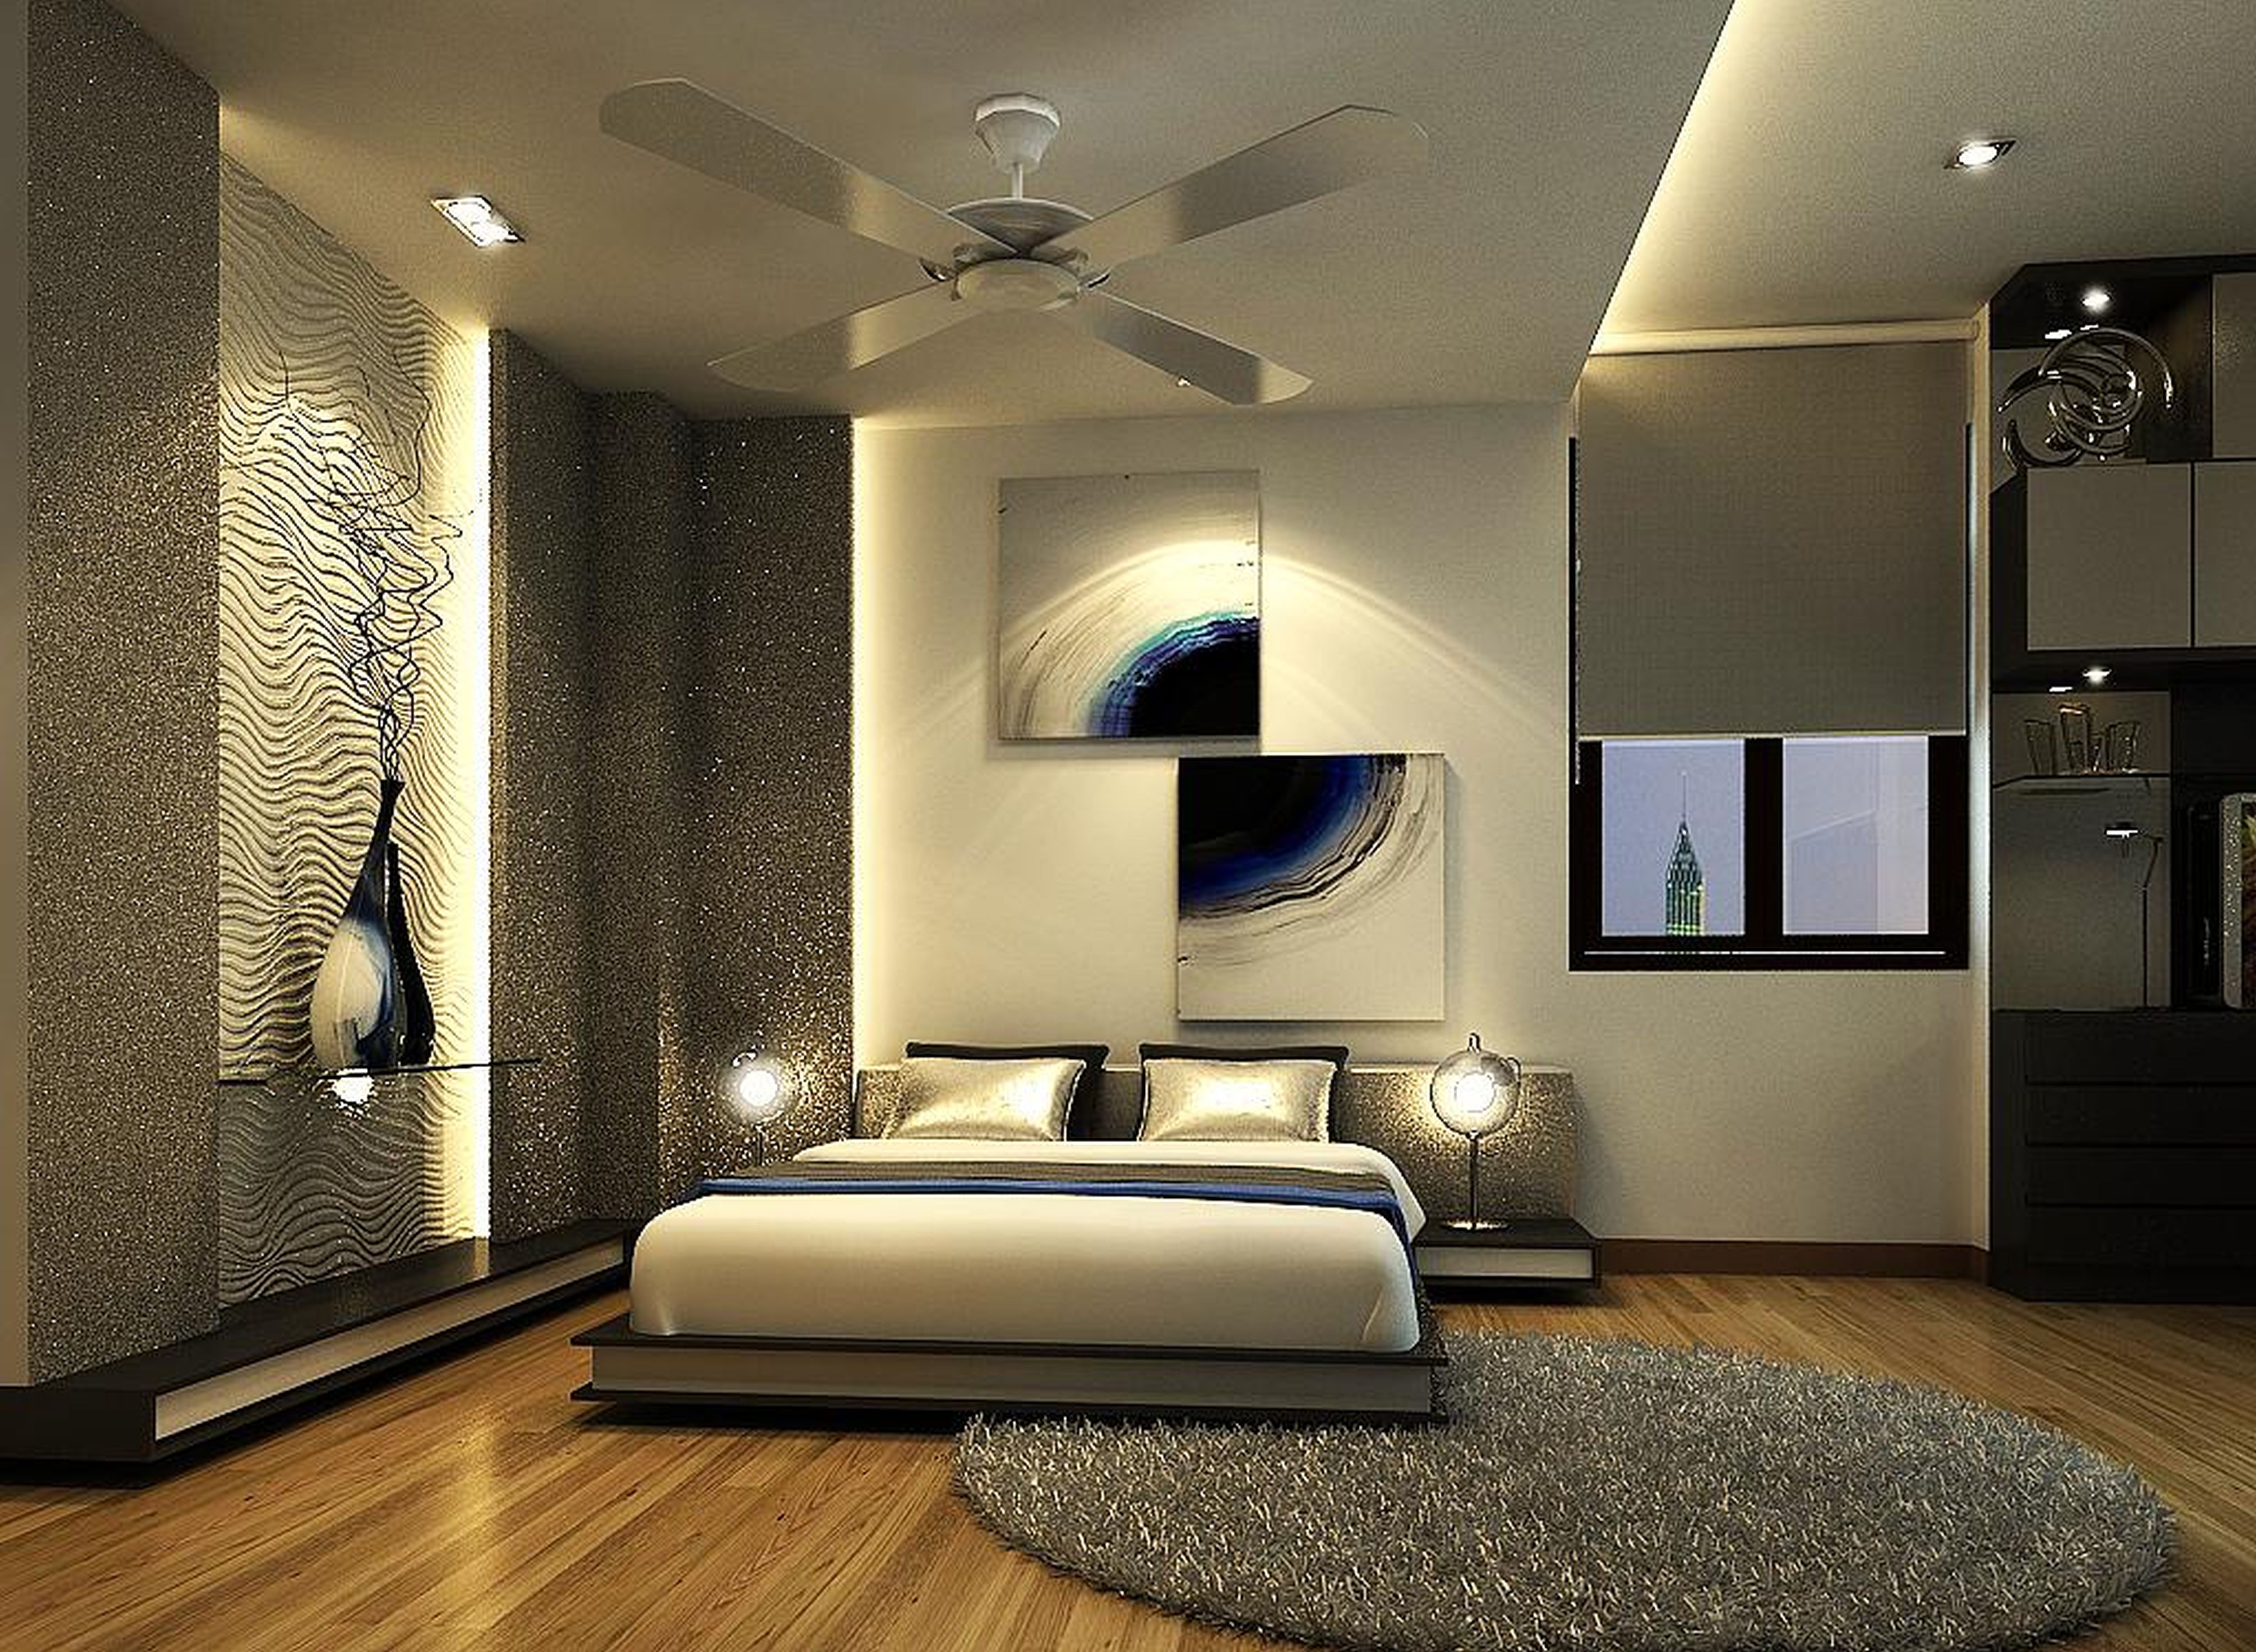 Bedroom Design Gallery For Inspiration - The WoW Style